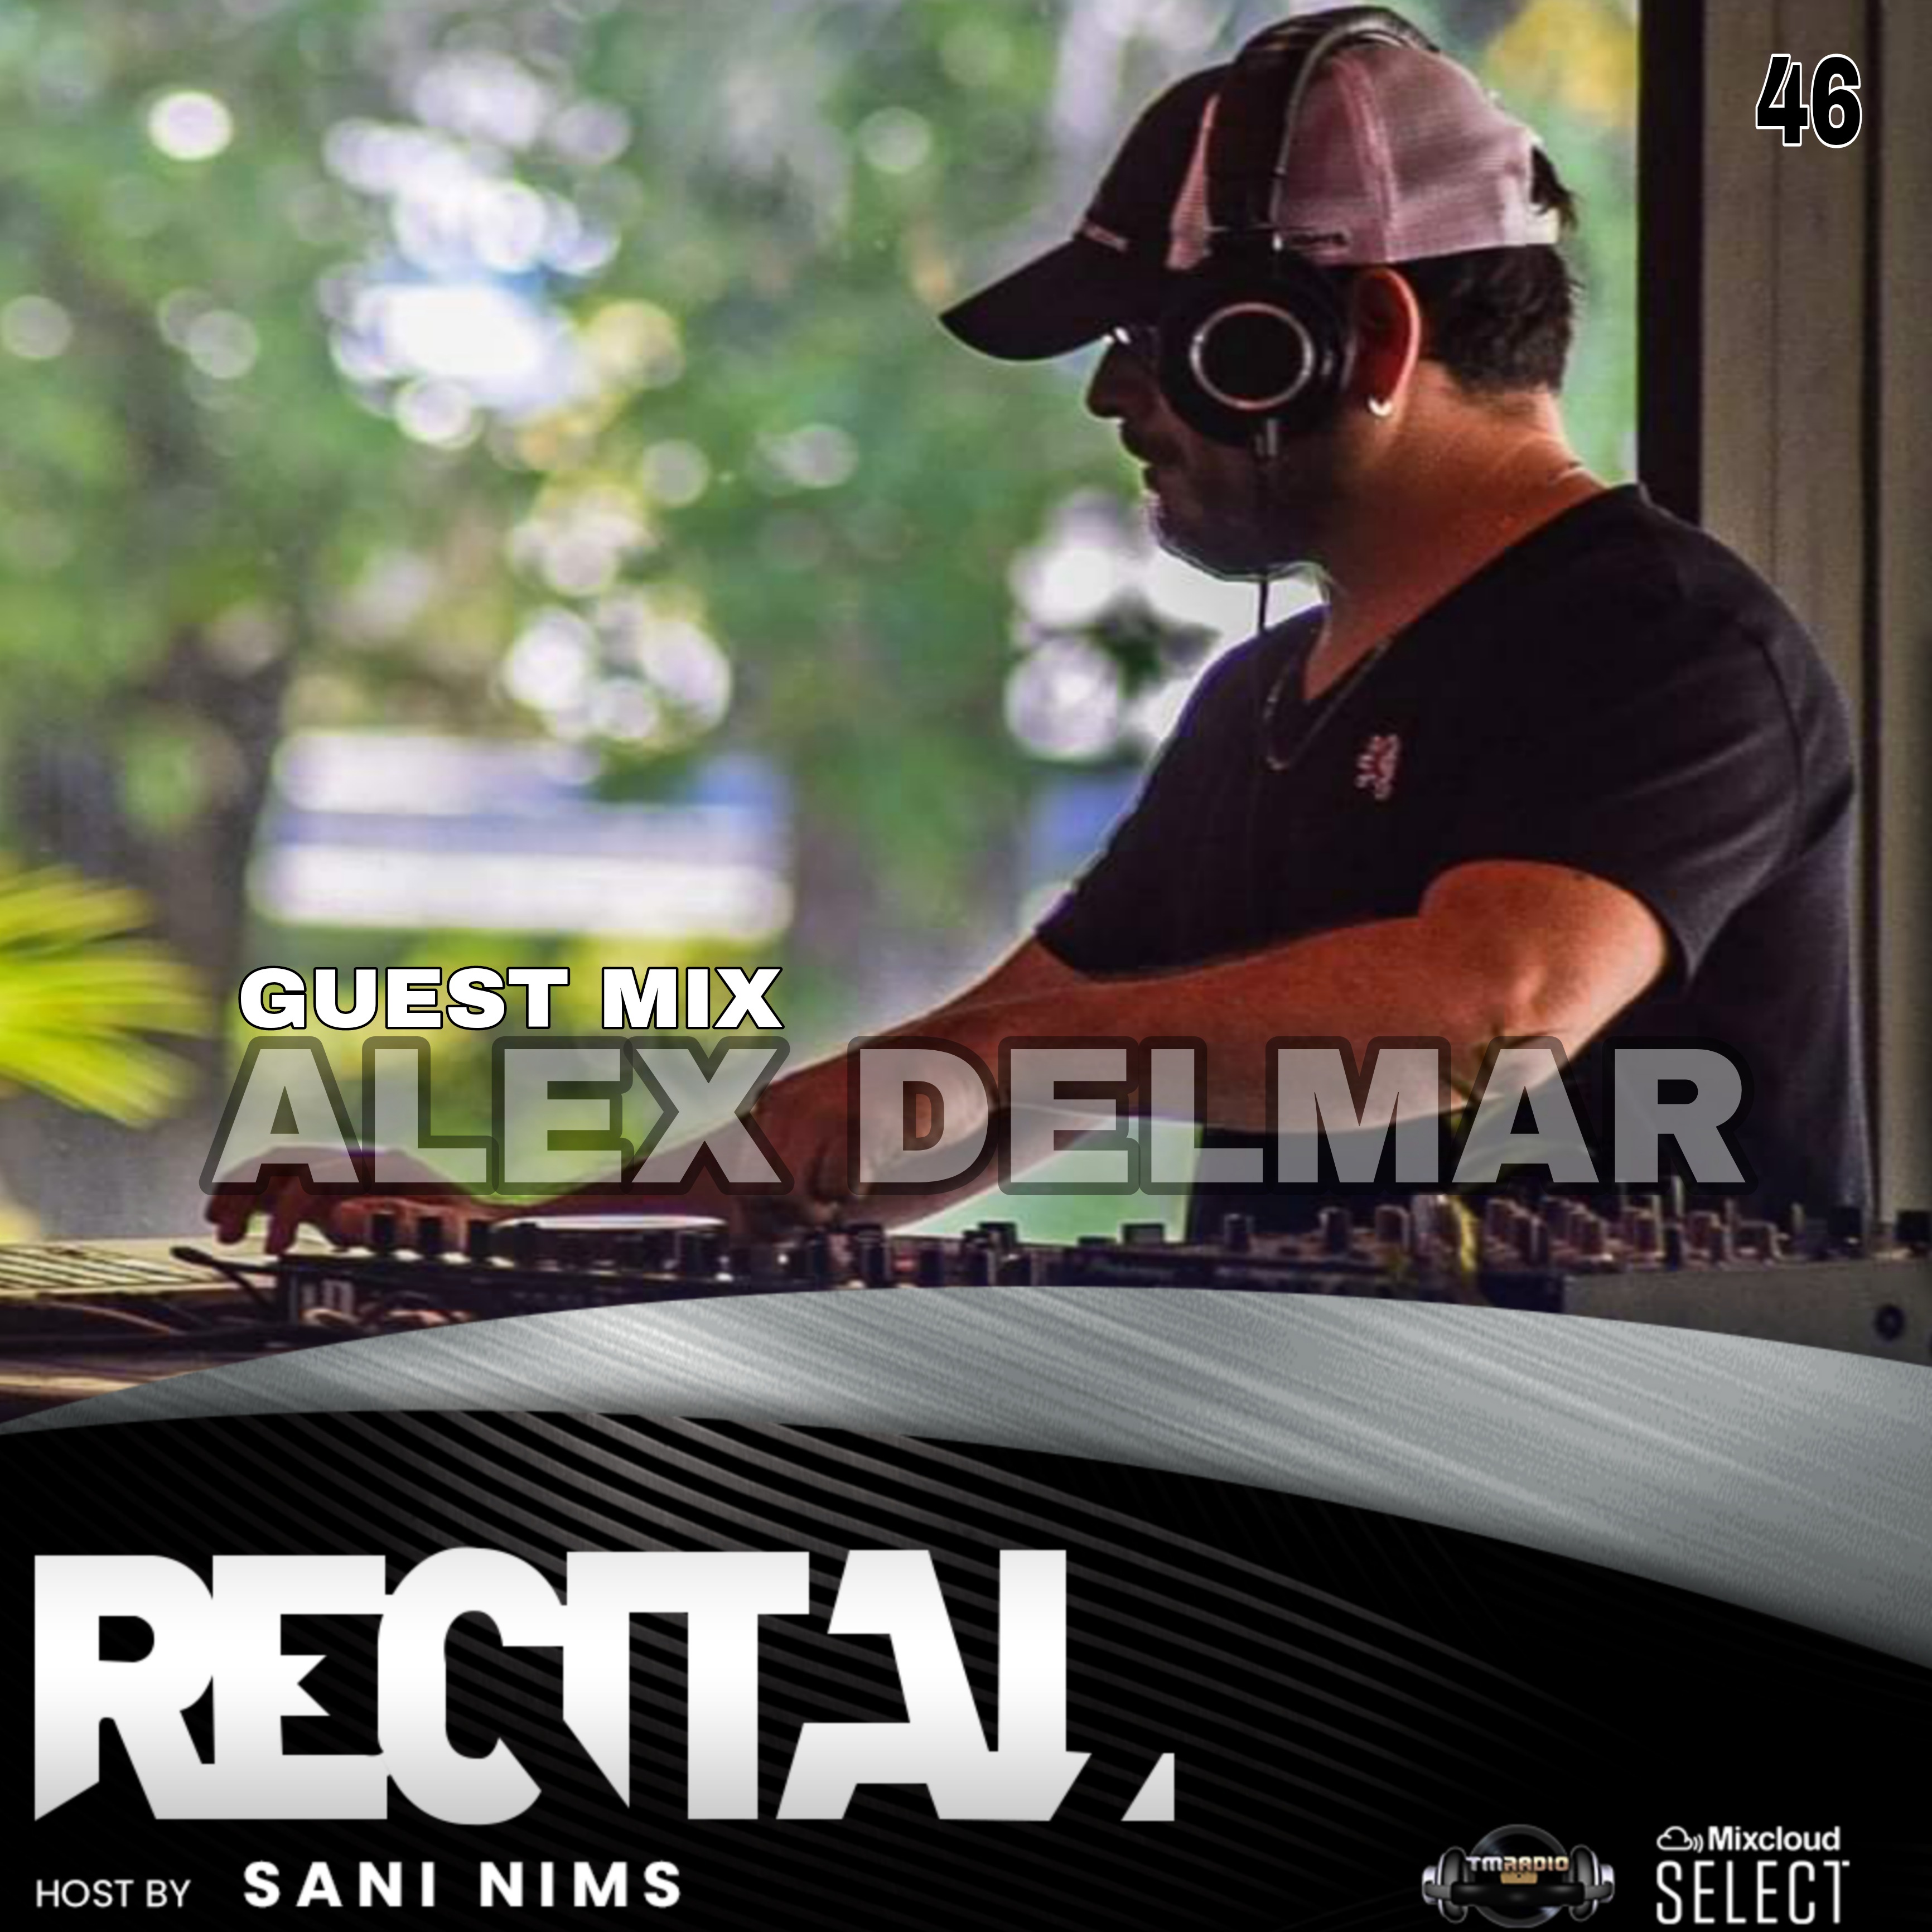 RECITAL RADIO SHOW EP 46 GUEST MIX BY ALEX DELMAR ON TM RADIO HOST BY SANI NIMS (from February 6th)